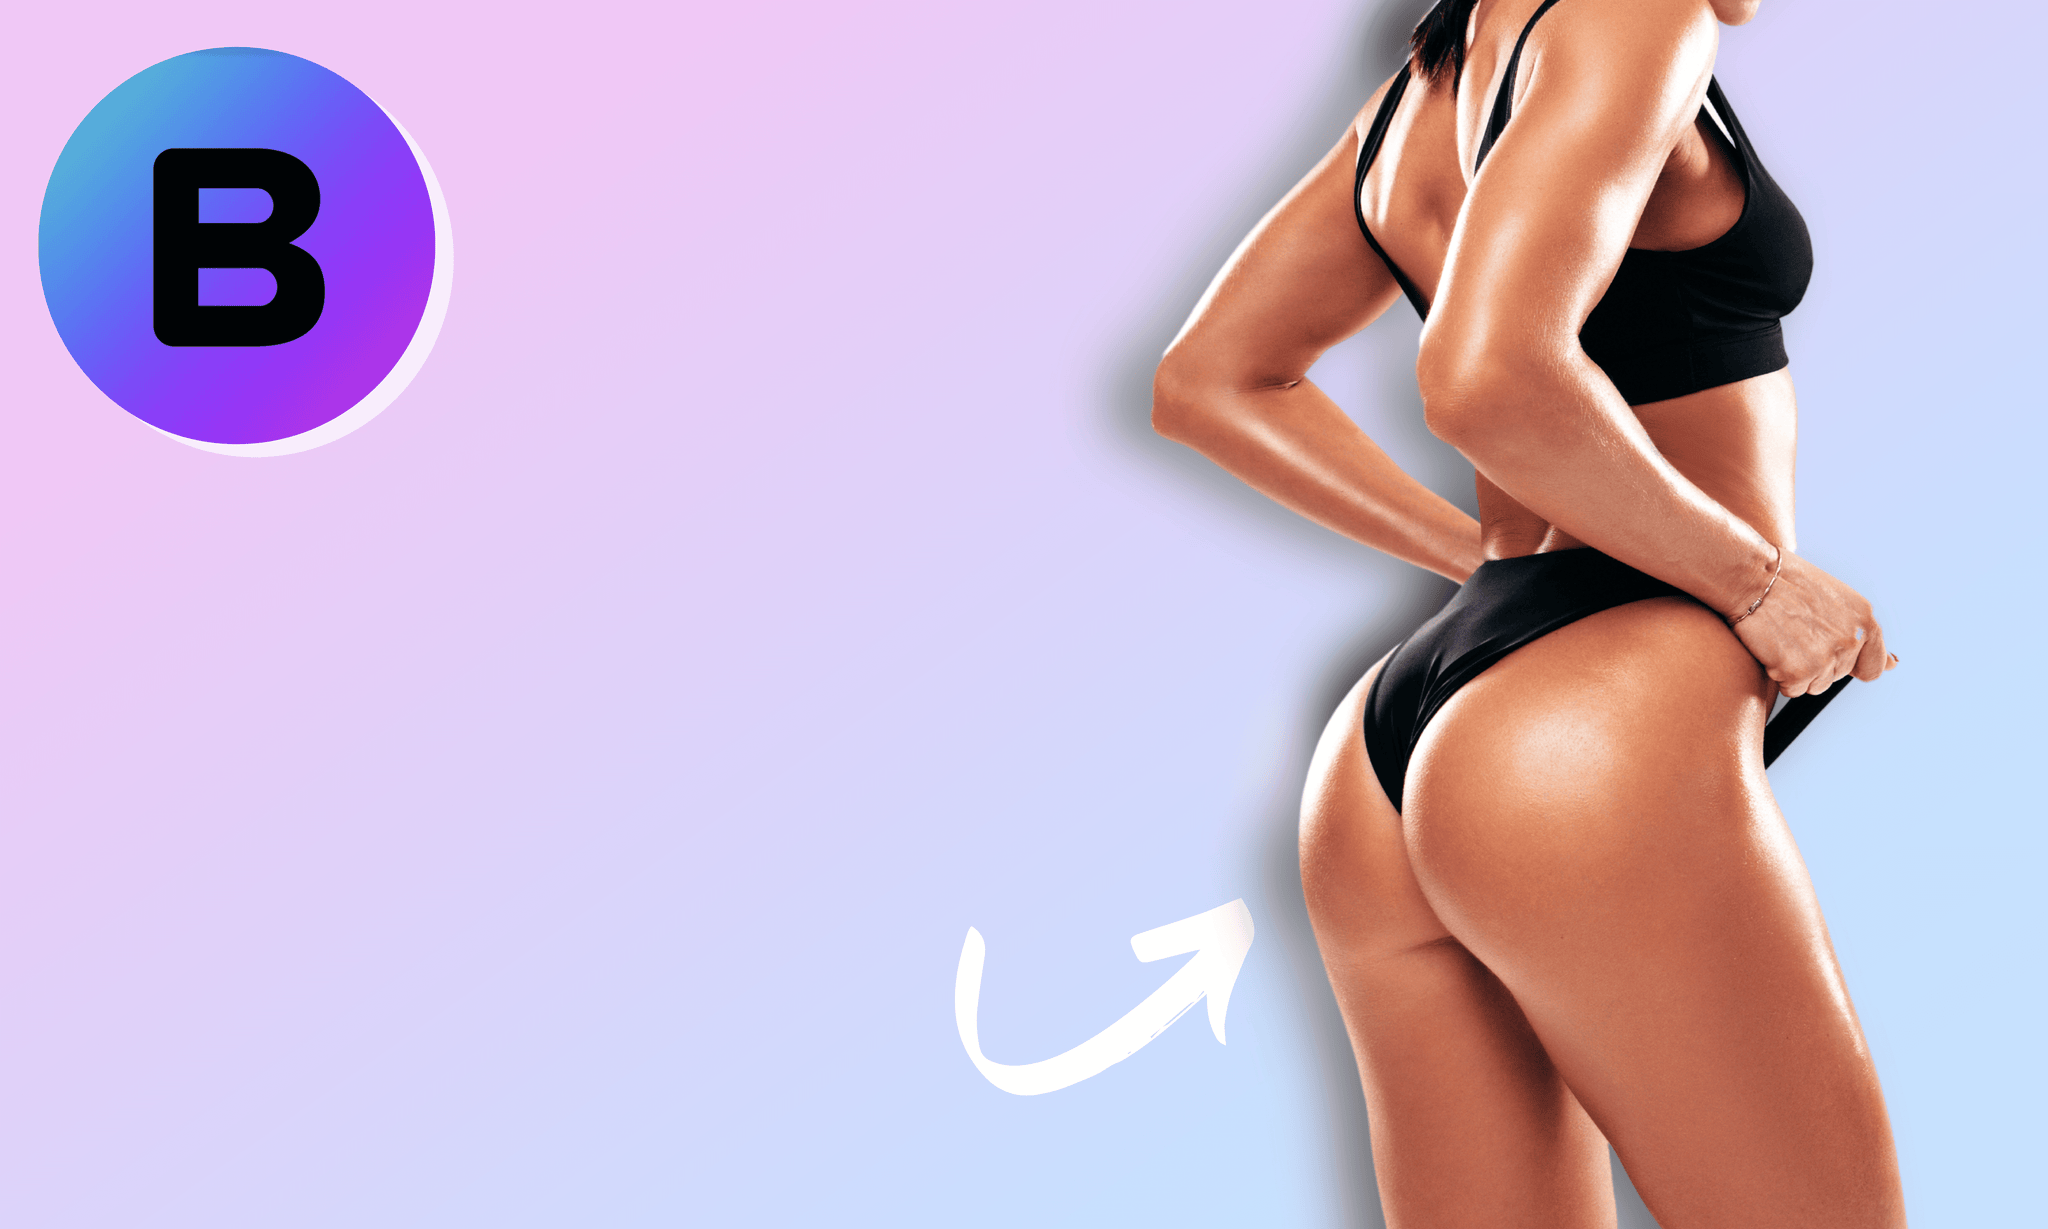 6 Best Cellulite Treatments - 2023 Edition